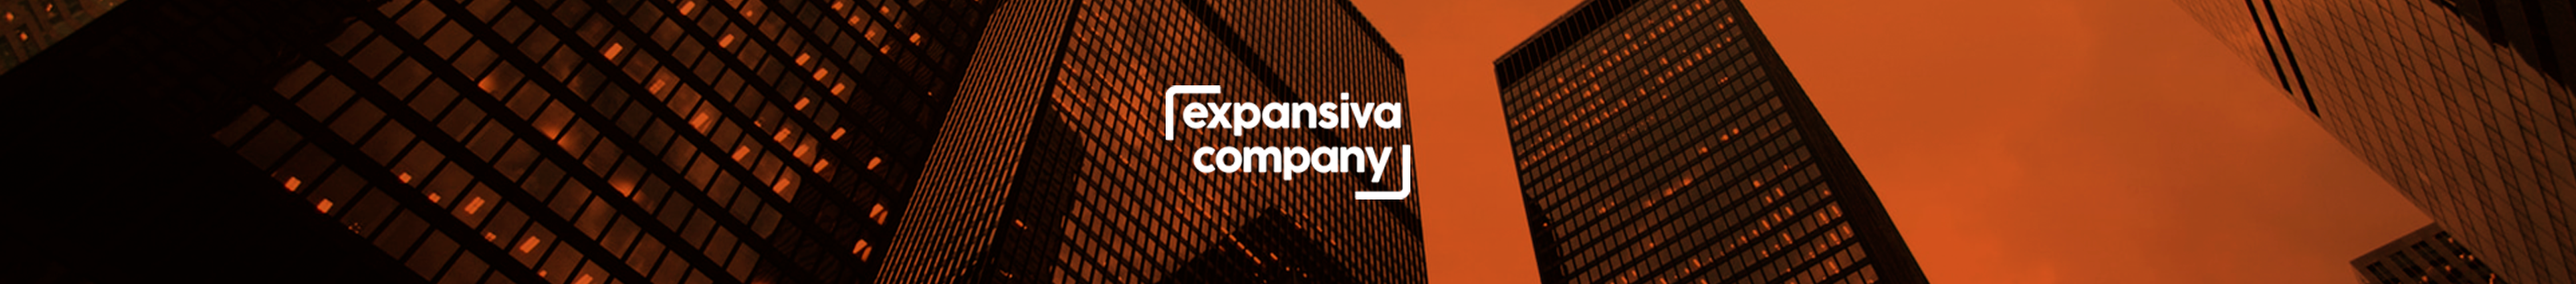 Expansiva Company's profile banner